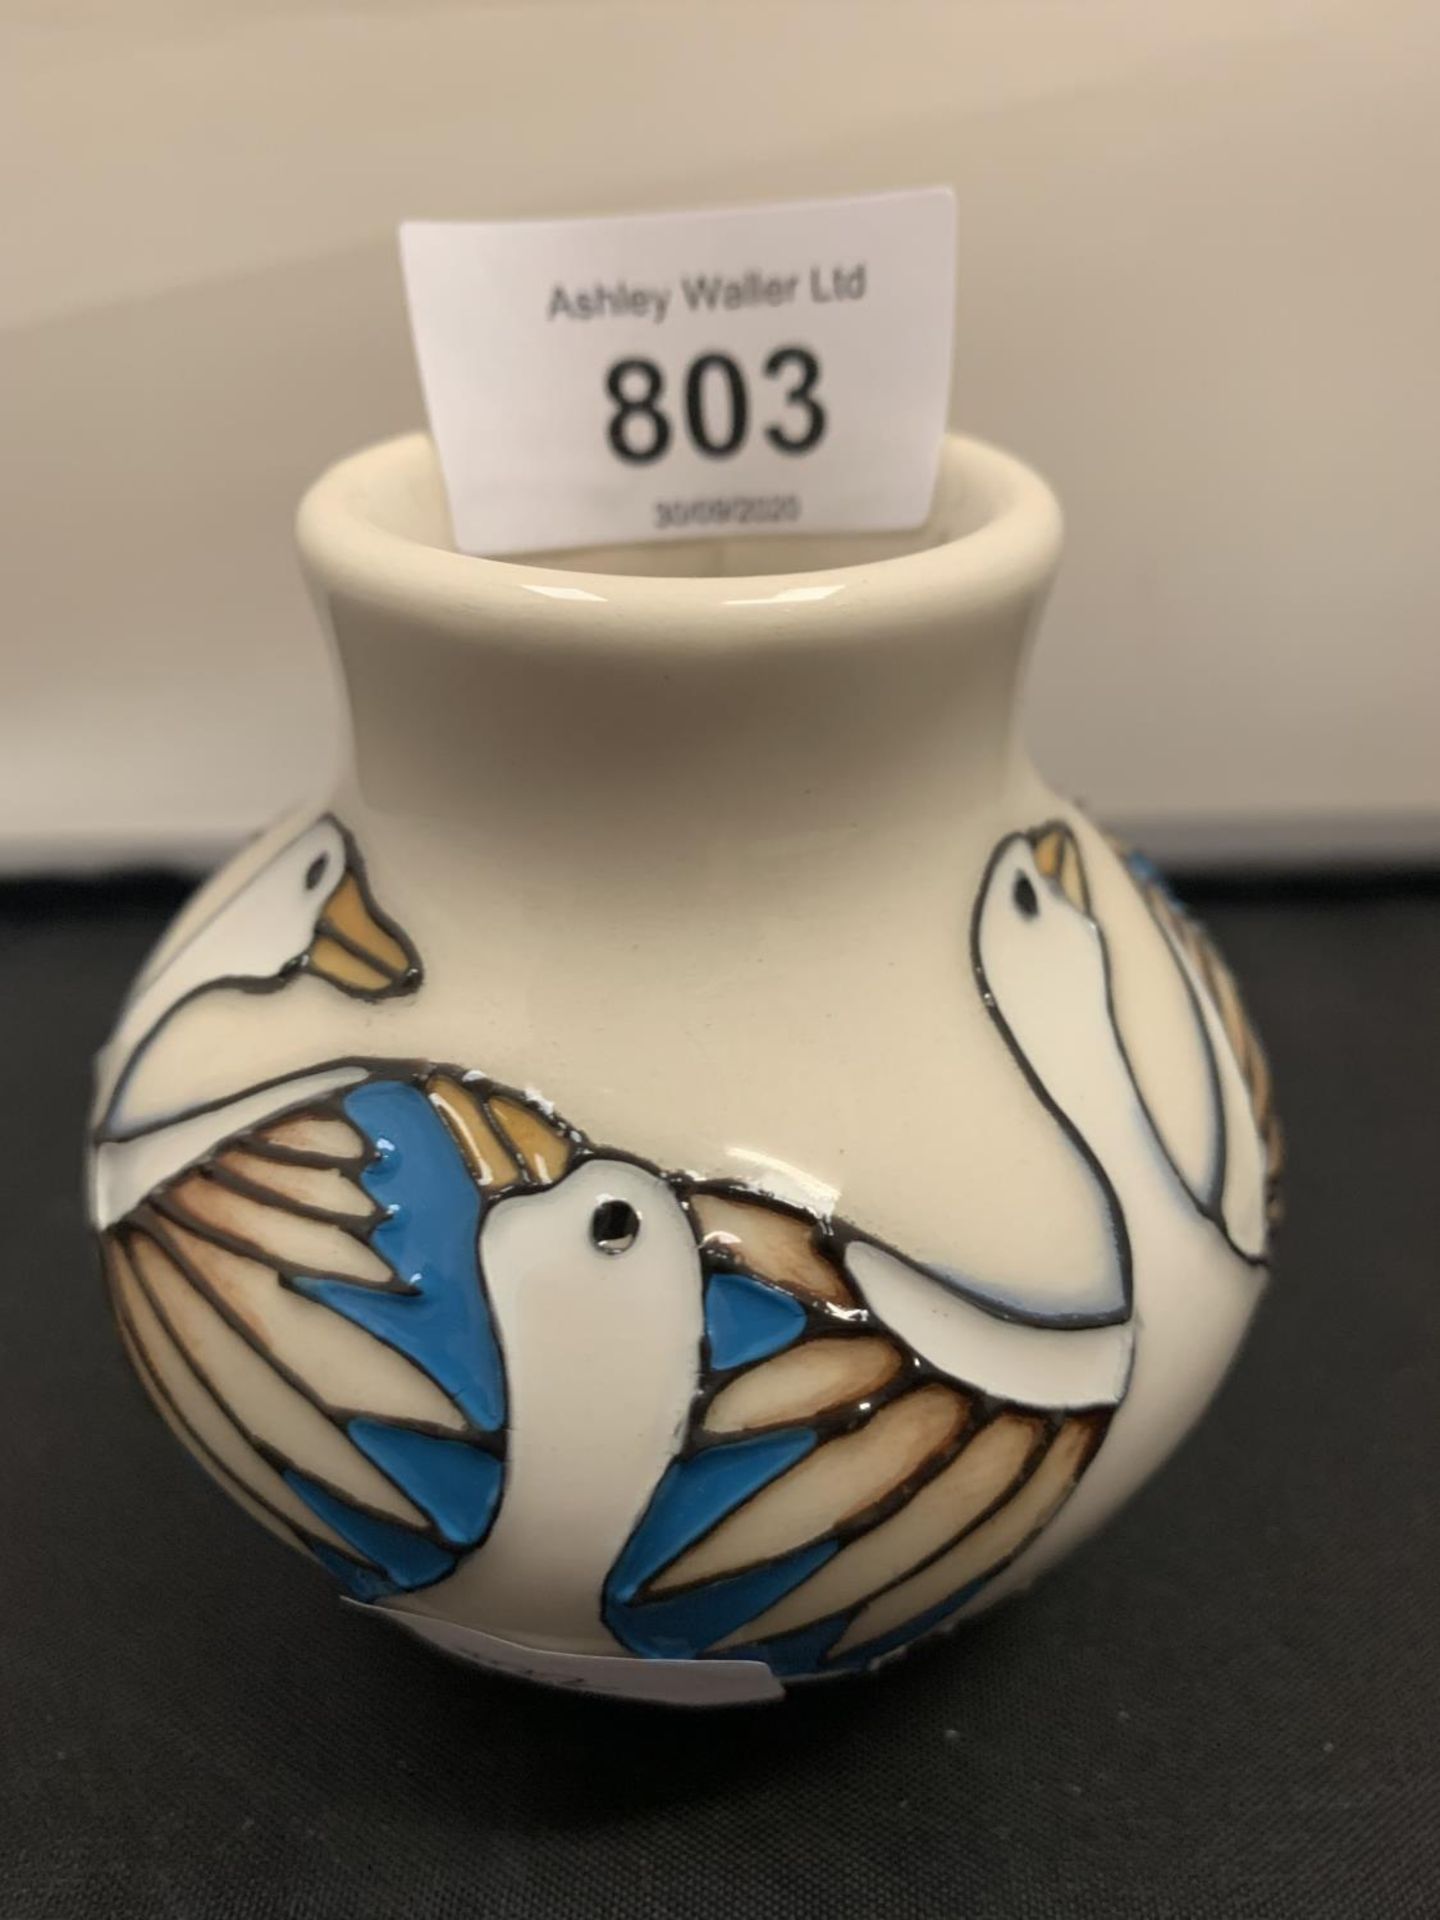 A MOORCROFT SIX GEESE LAYING 3 INCH VASE